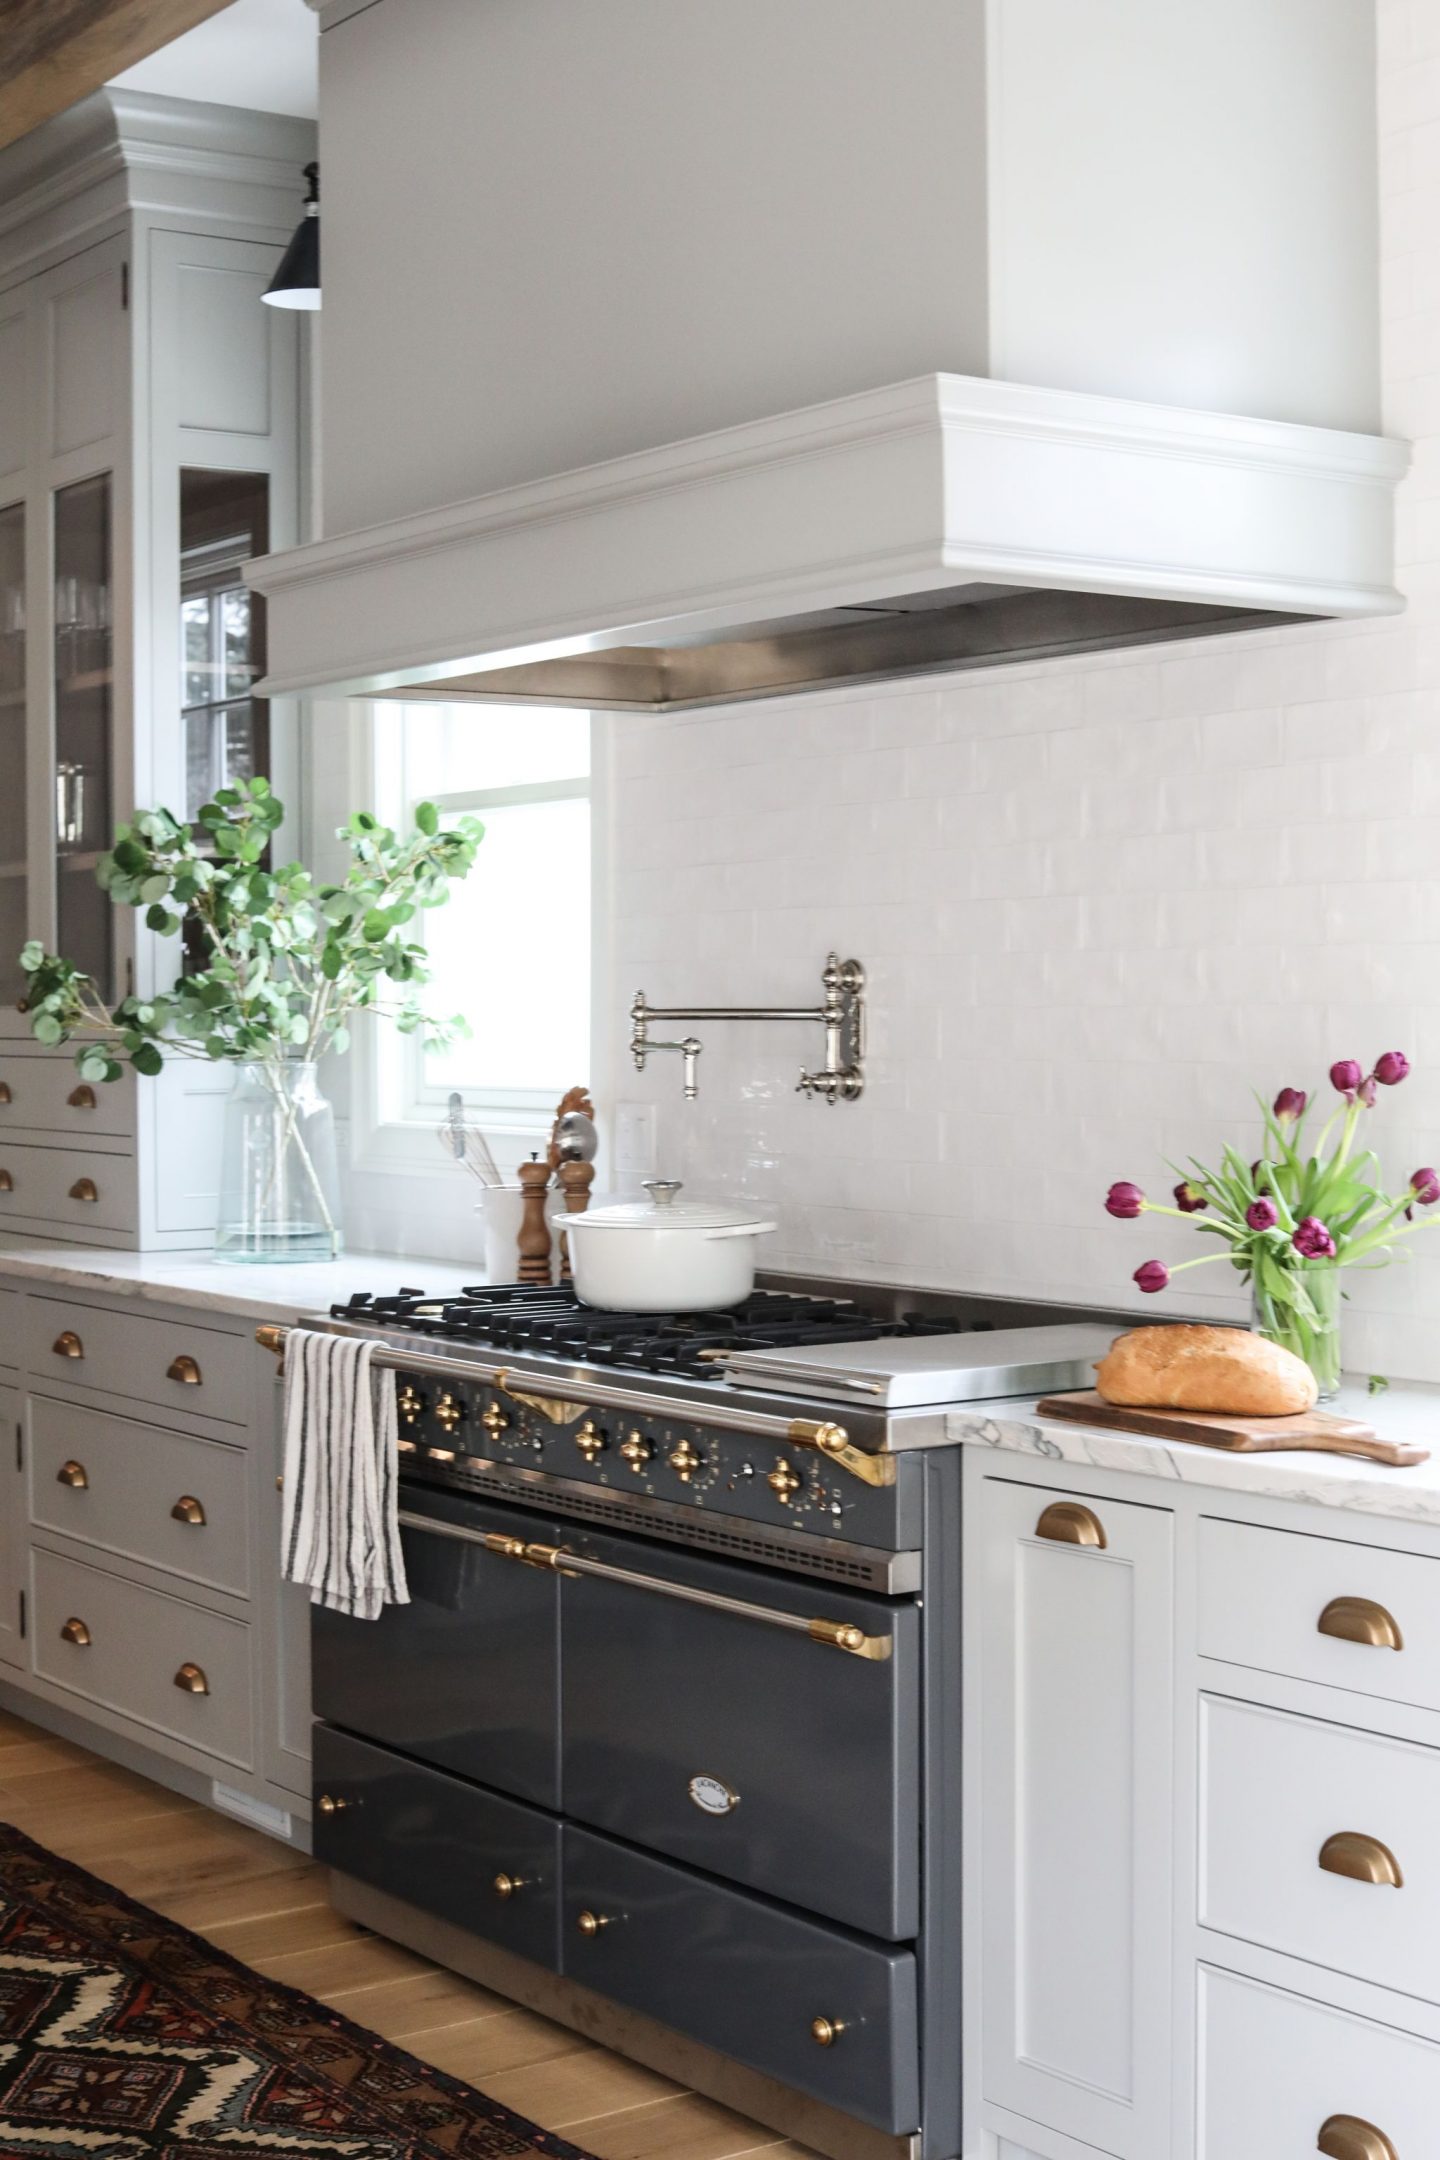 Traditional kitchen with classic style, simplicity, and sophistication from Park & Oak. Come see inspiring photos and learn 16 simple yet sophisticated kitchen design ideas.